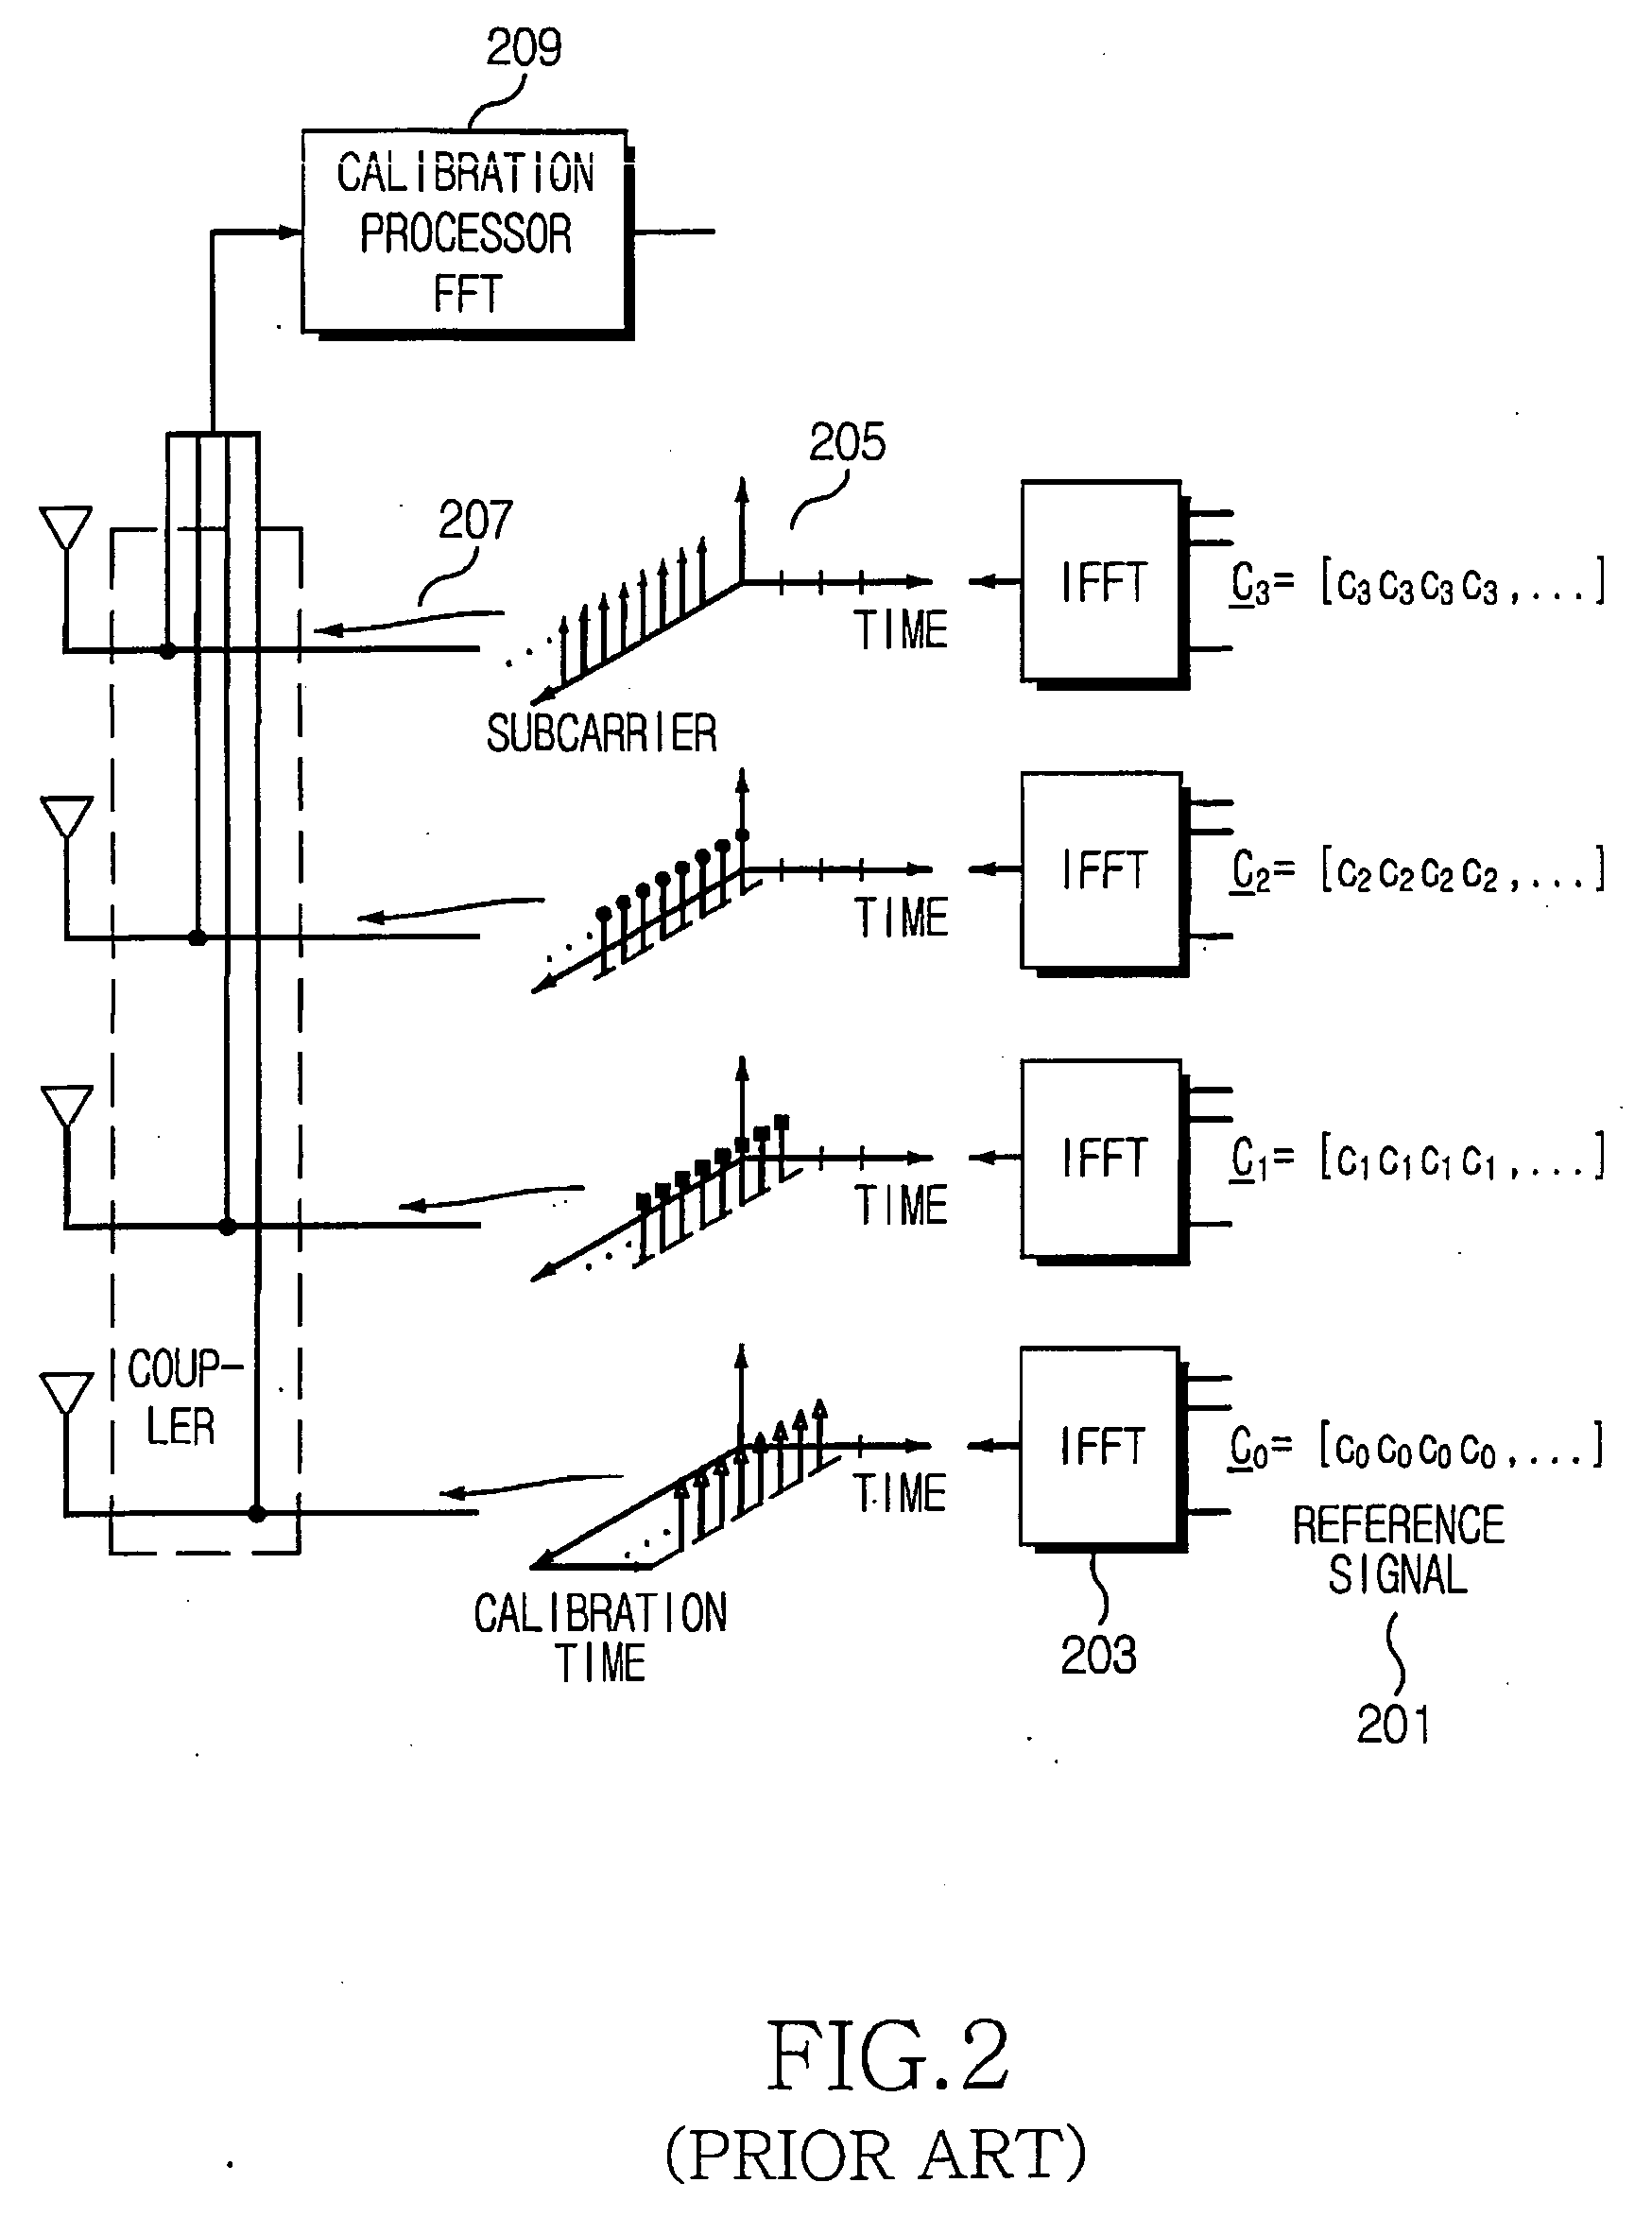 Apparatus and method for calibrating transmission paths in a multicarrier communication system using multiple antennas